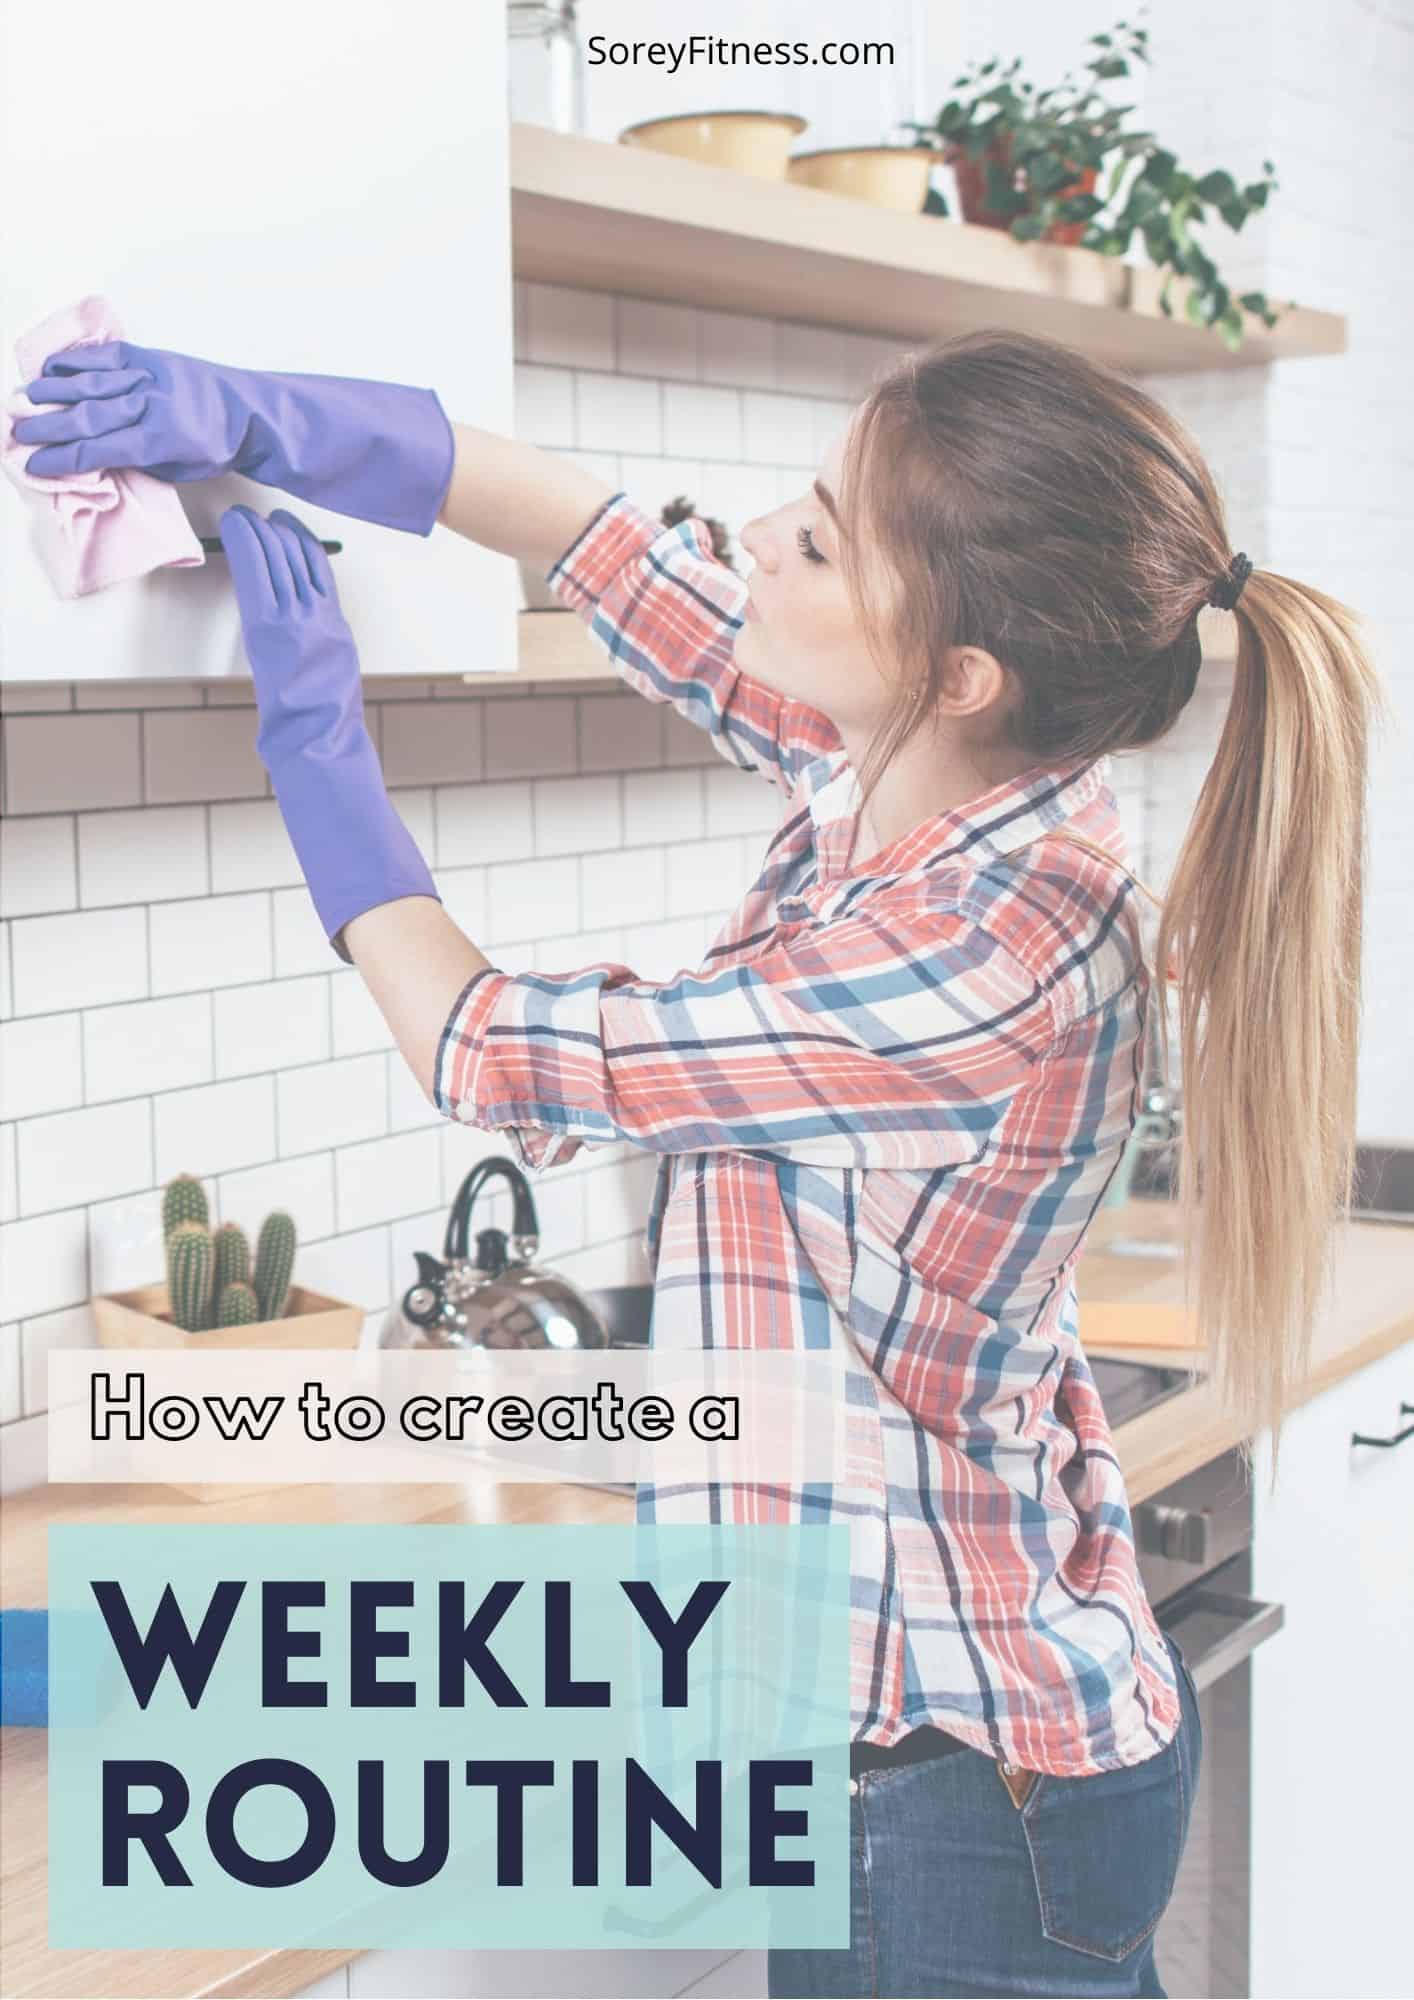 photo of woman cleaning cabinets with text overlay that says "how to create a weekly routine"